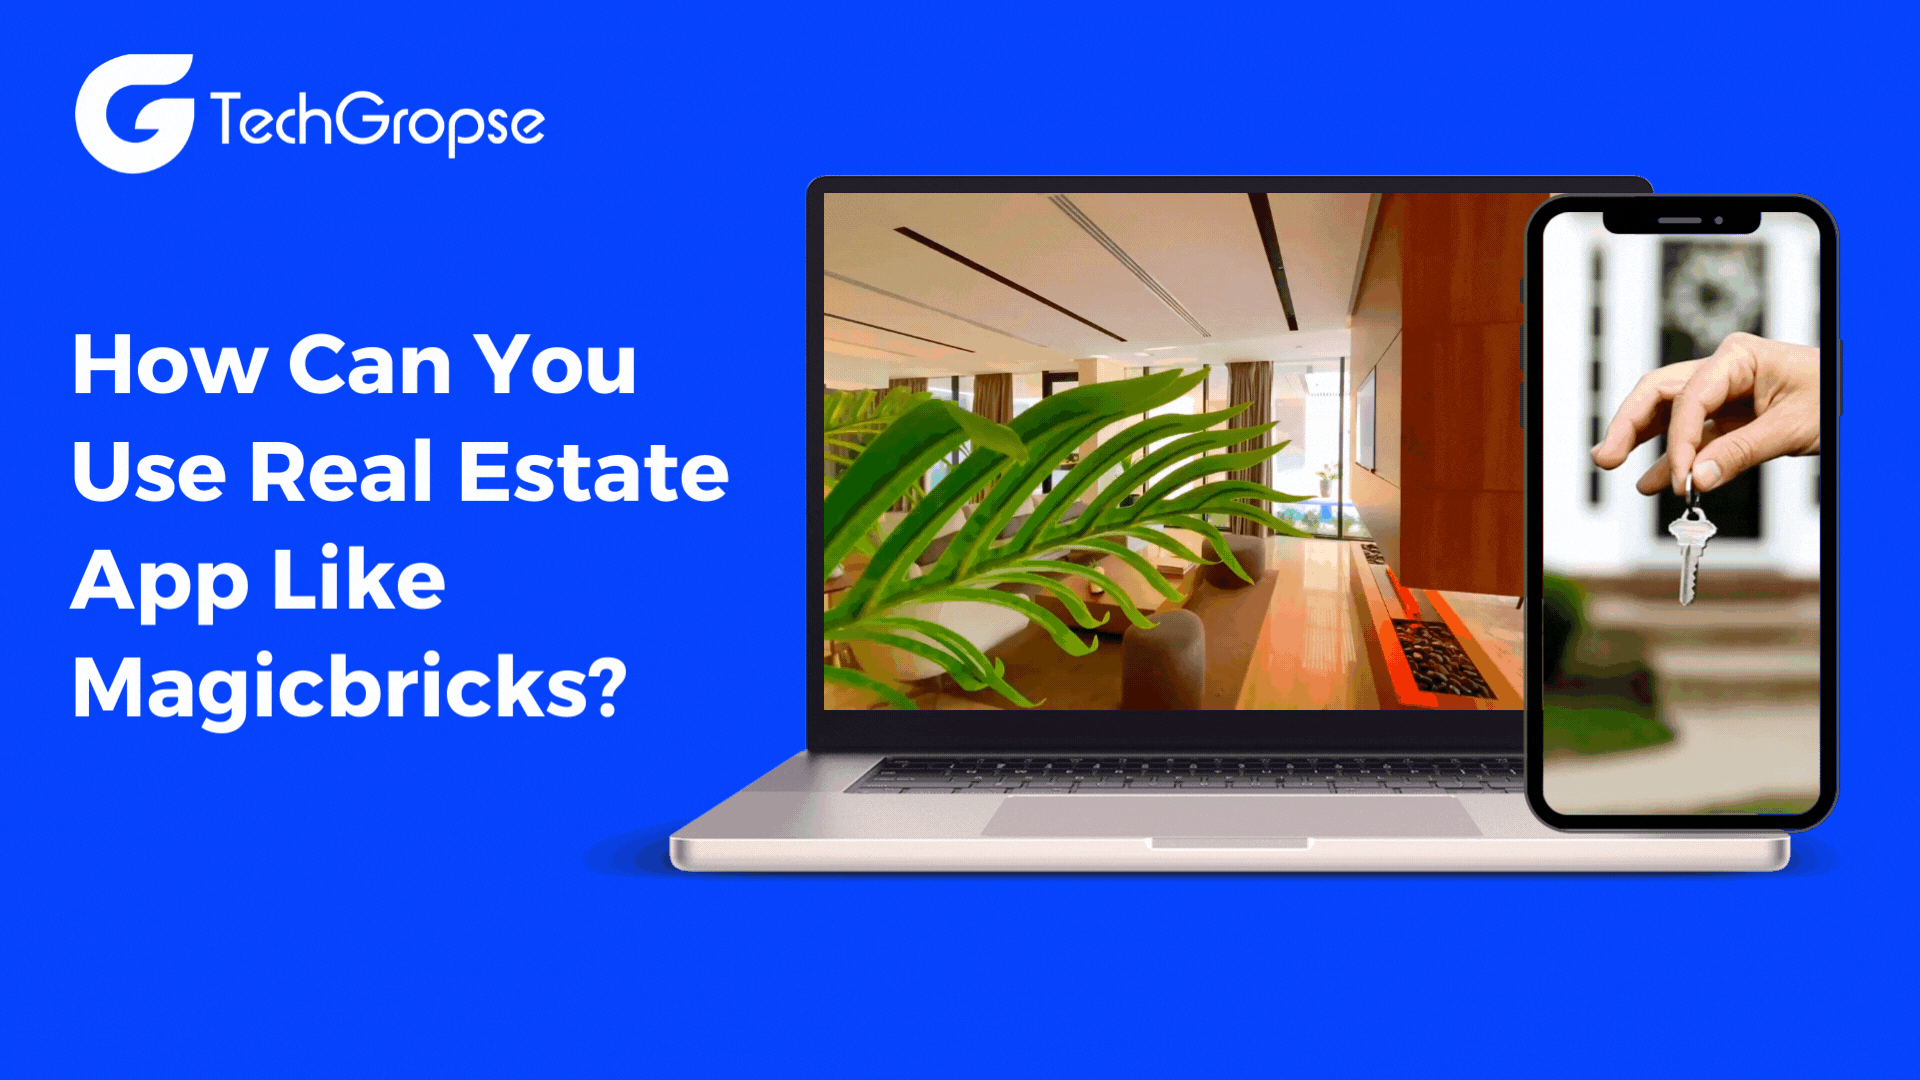 How Can You Use Real Estate App Like Magicbricks?